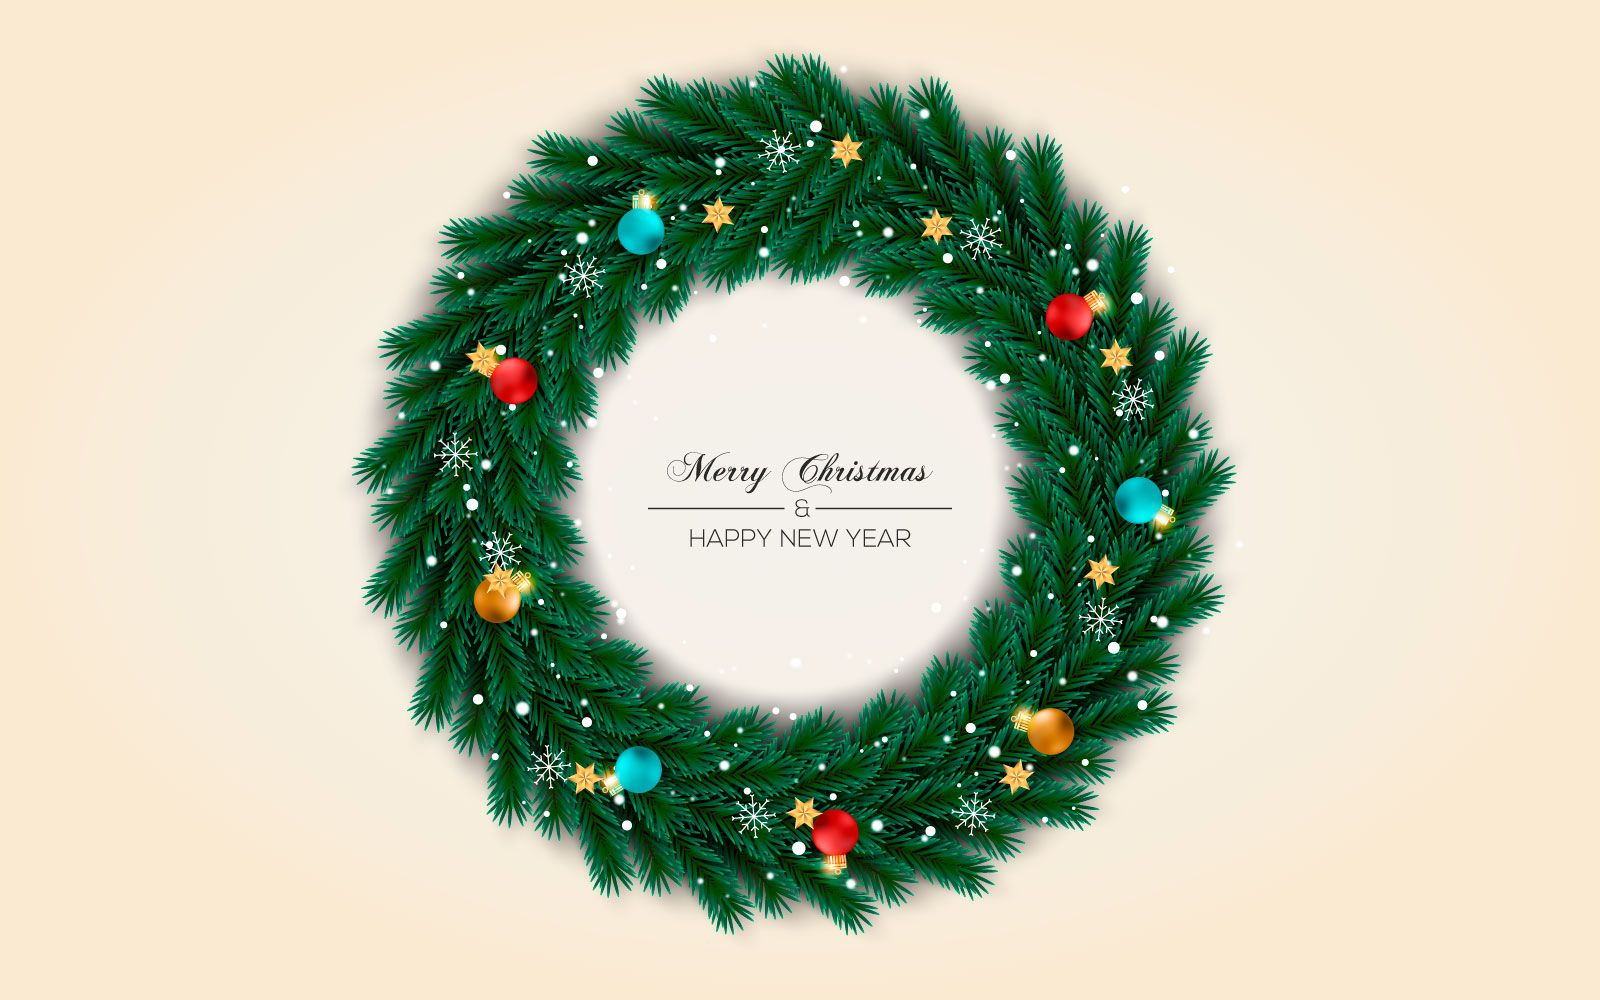 Best christmas wishes wreath with decorated holiday wreath flat vector illustration